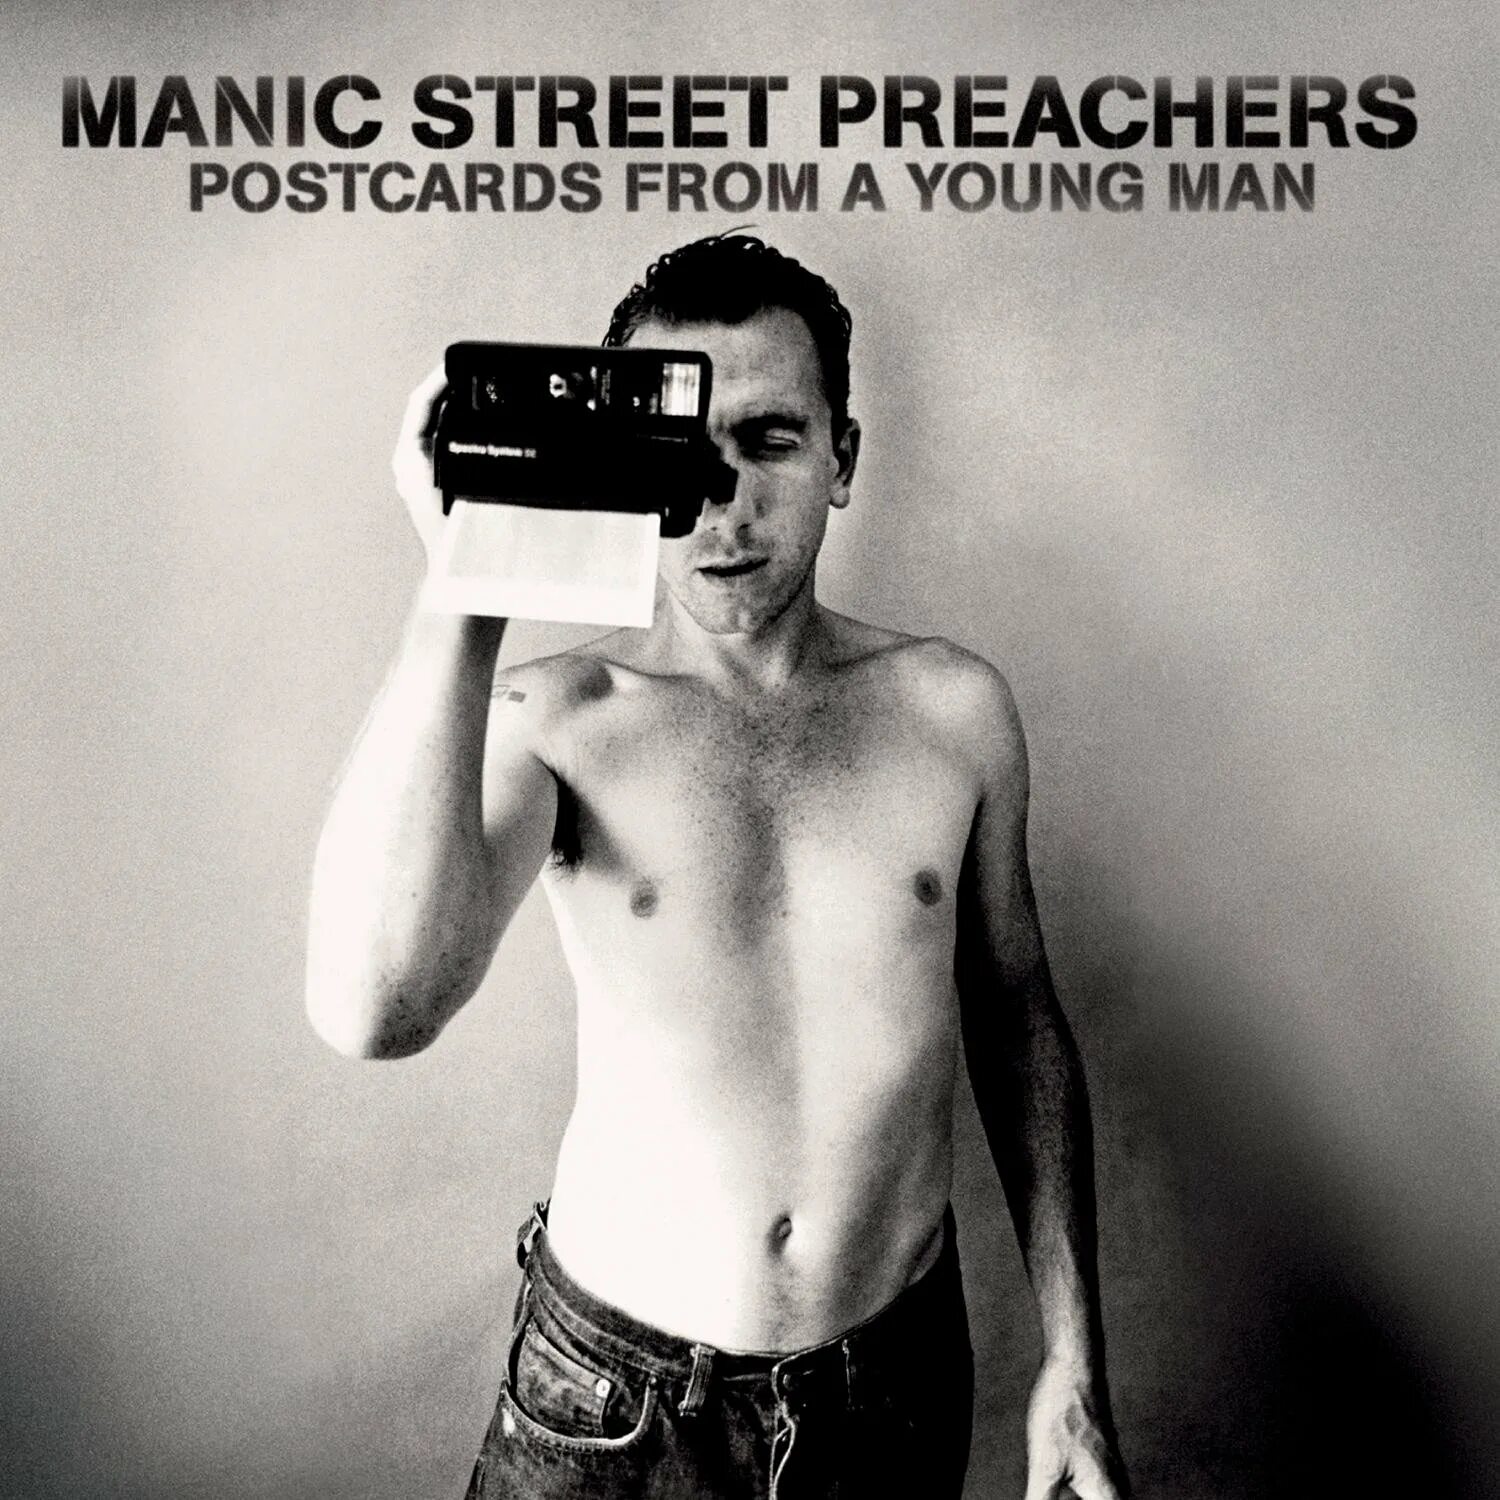 Manic Street Preachers. Postcards from a young man. Manic Street Preachers альбомы. Manic Street Preachers Generation terrorists. This man is young